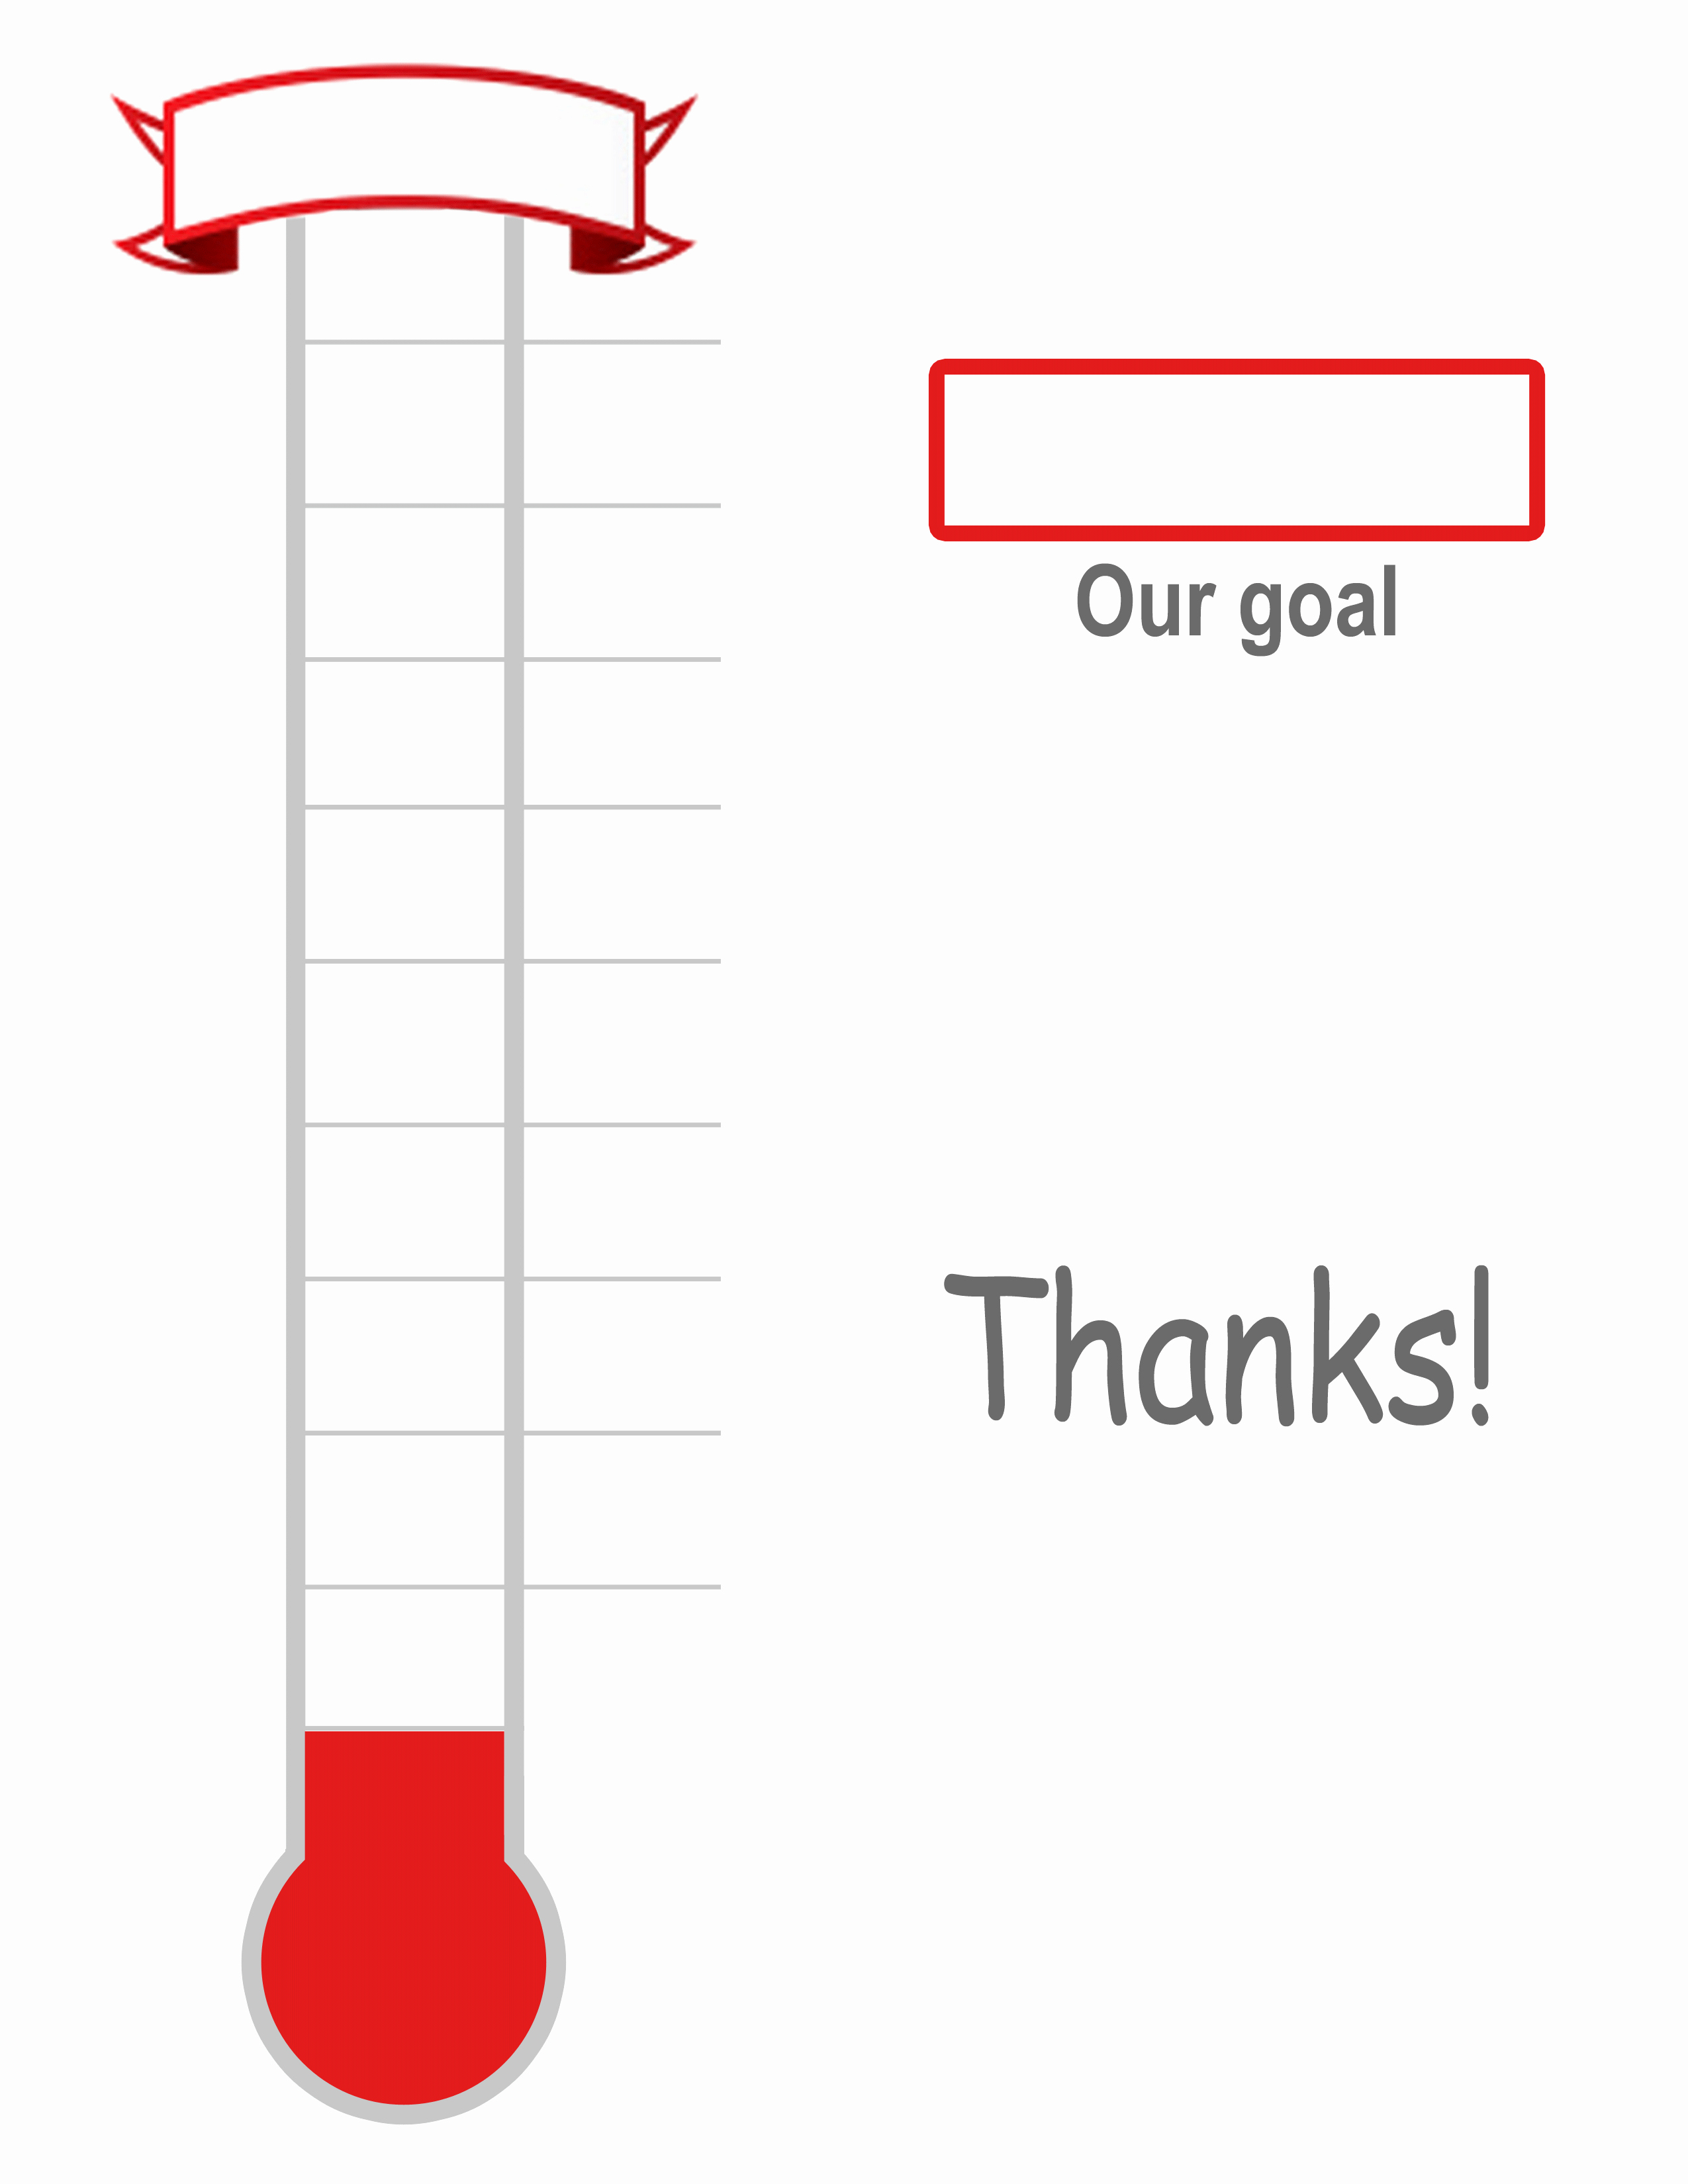 Printable thermometer Goal Best Of thermometer 2 Our Goal Thanks2